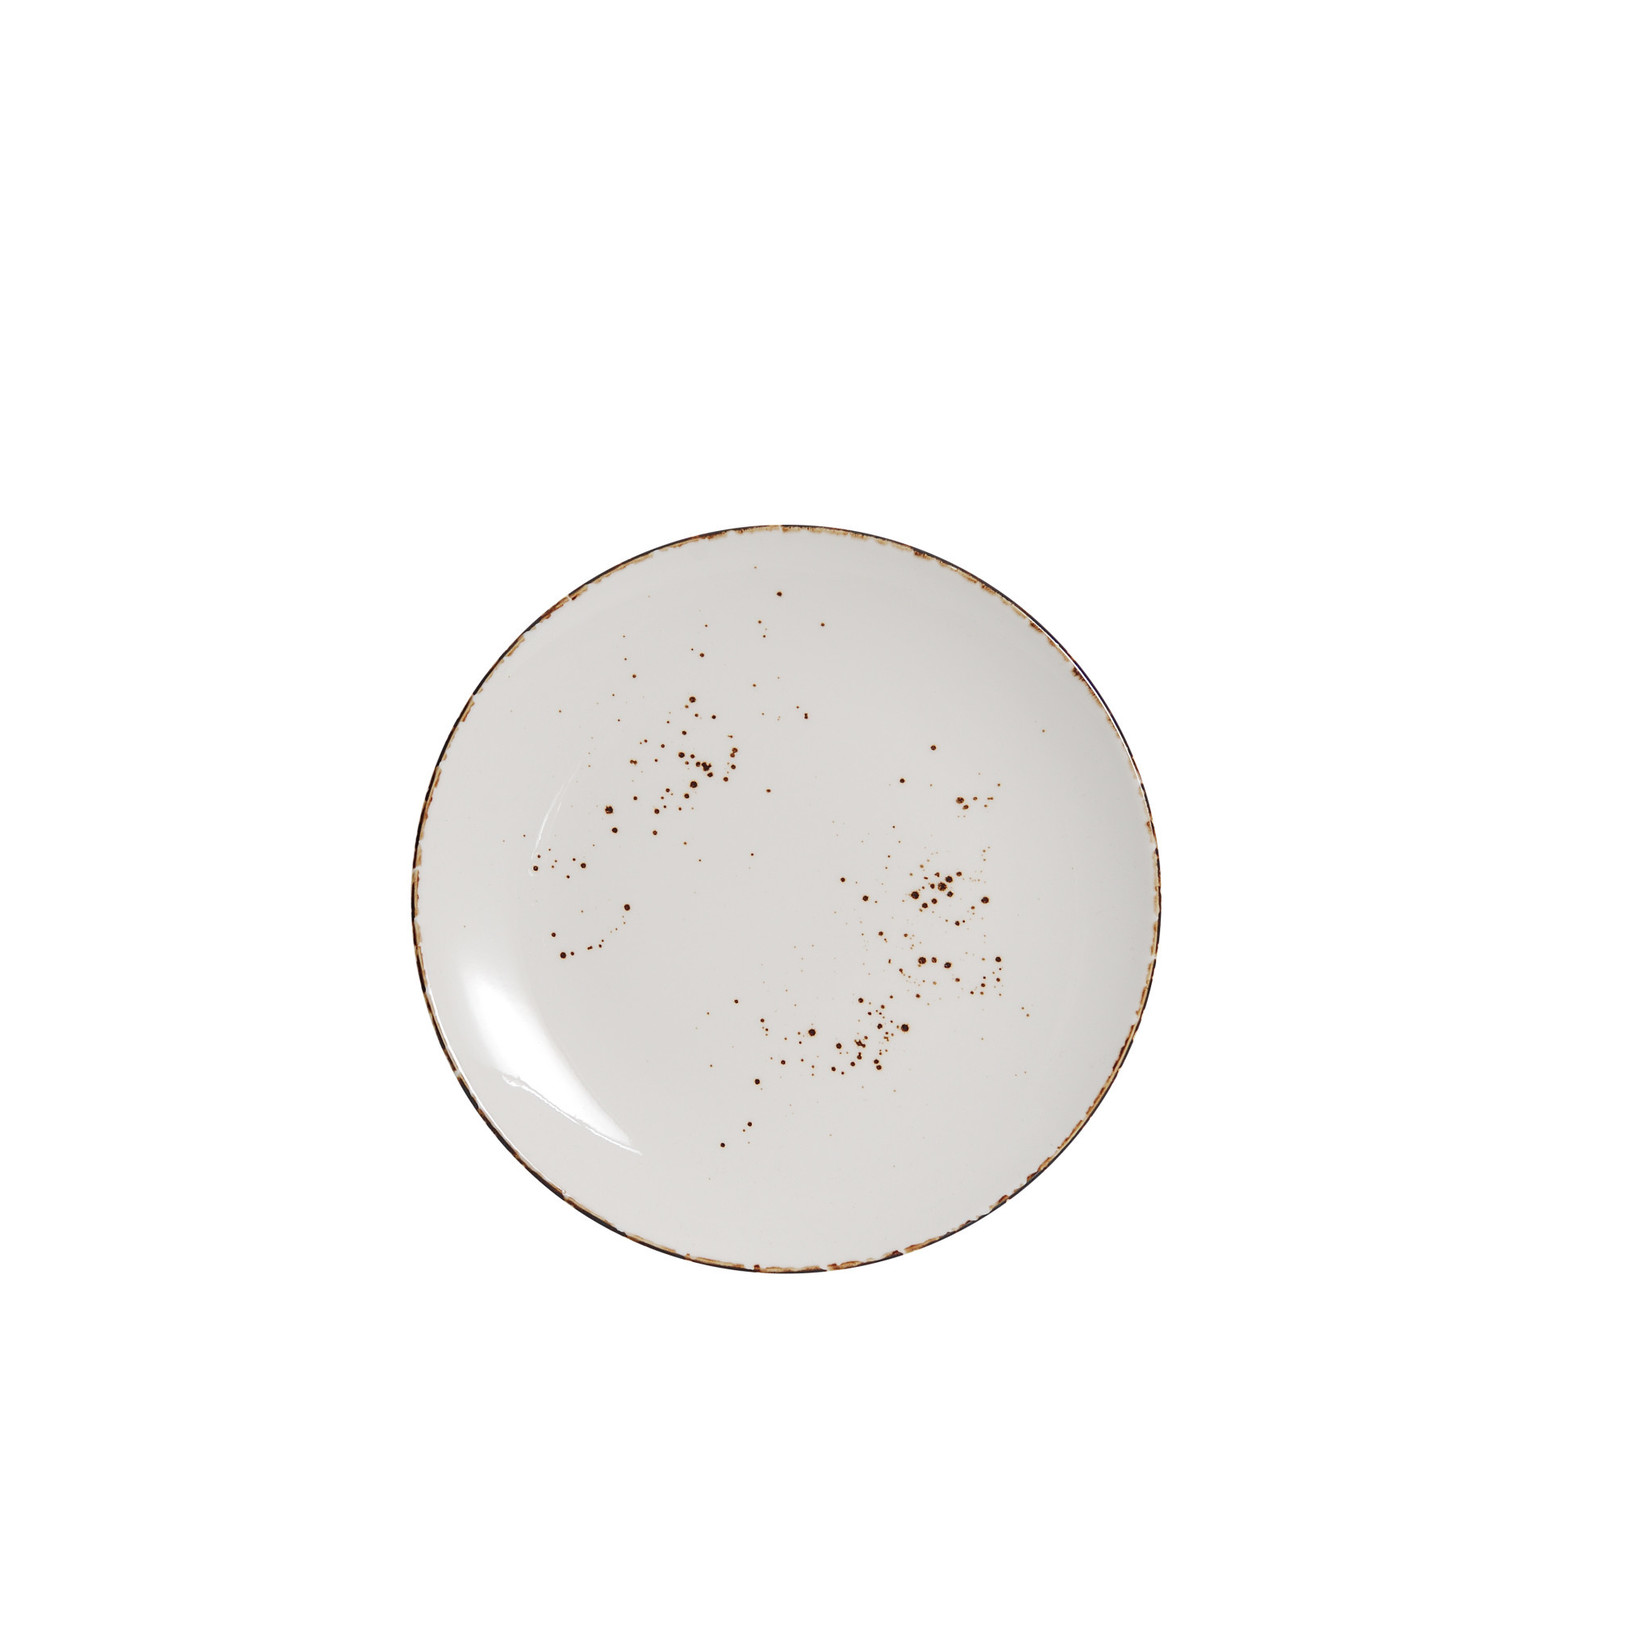 Palate and Plate AW-8744 7.5” coupe splash white 24/cs